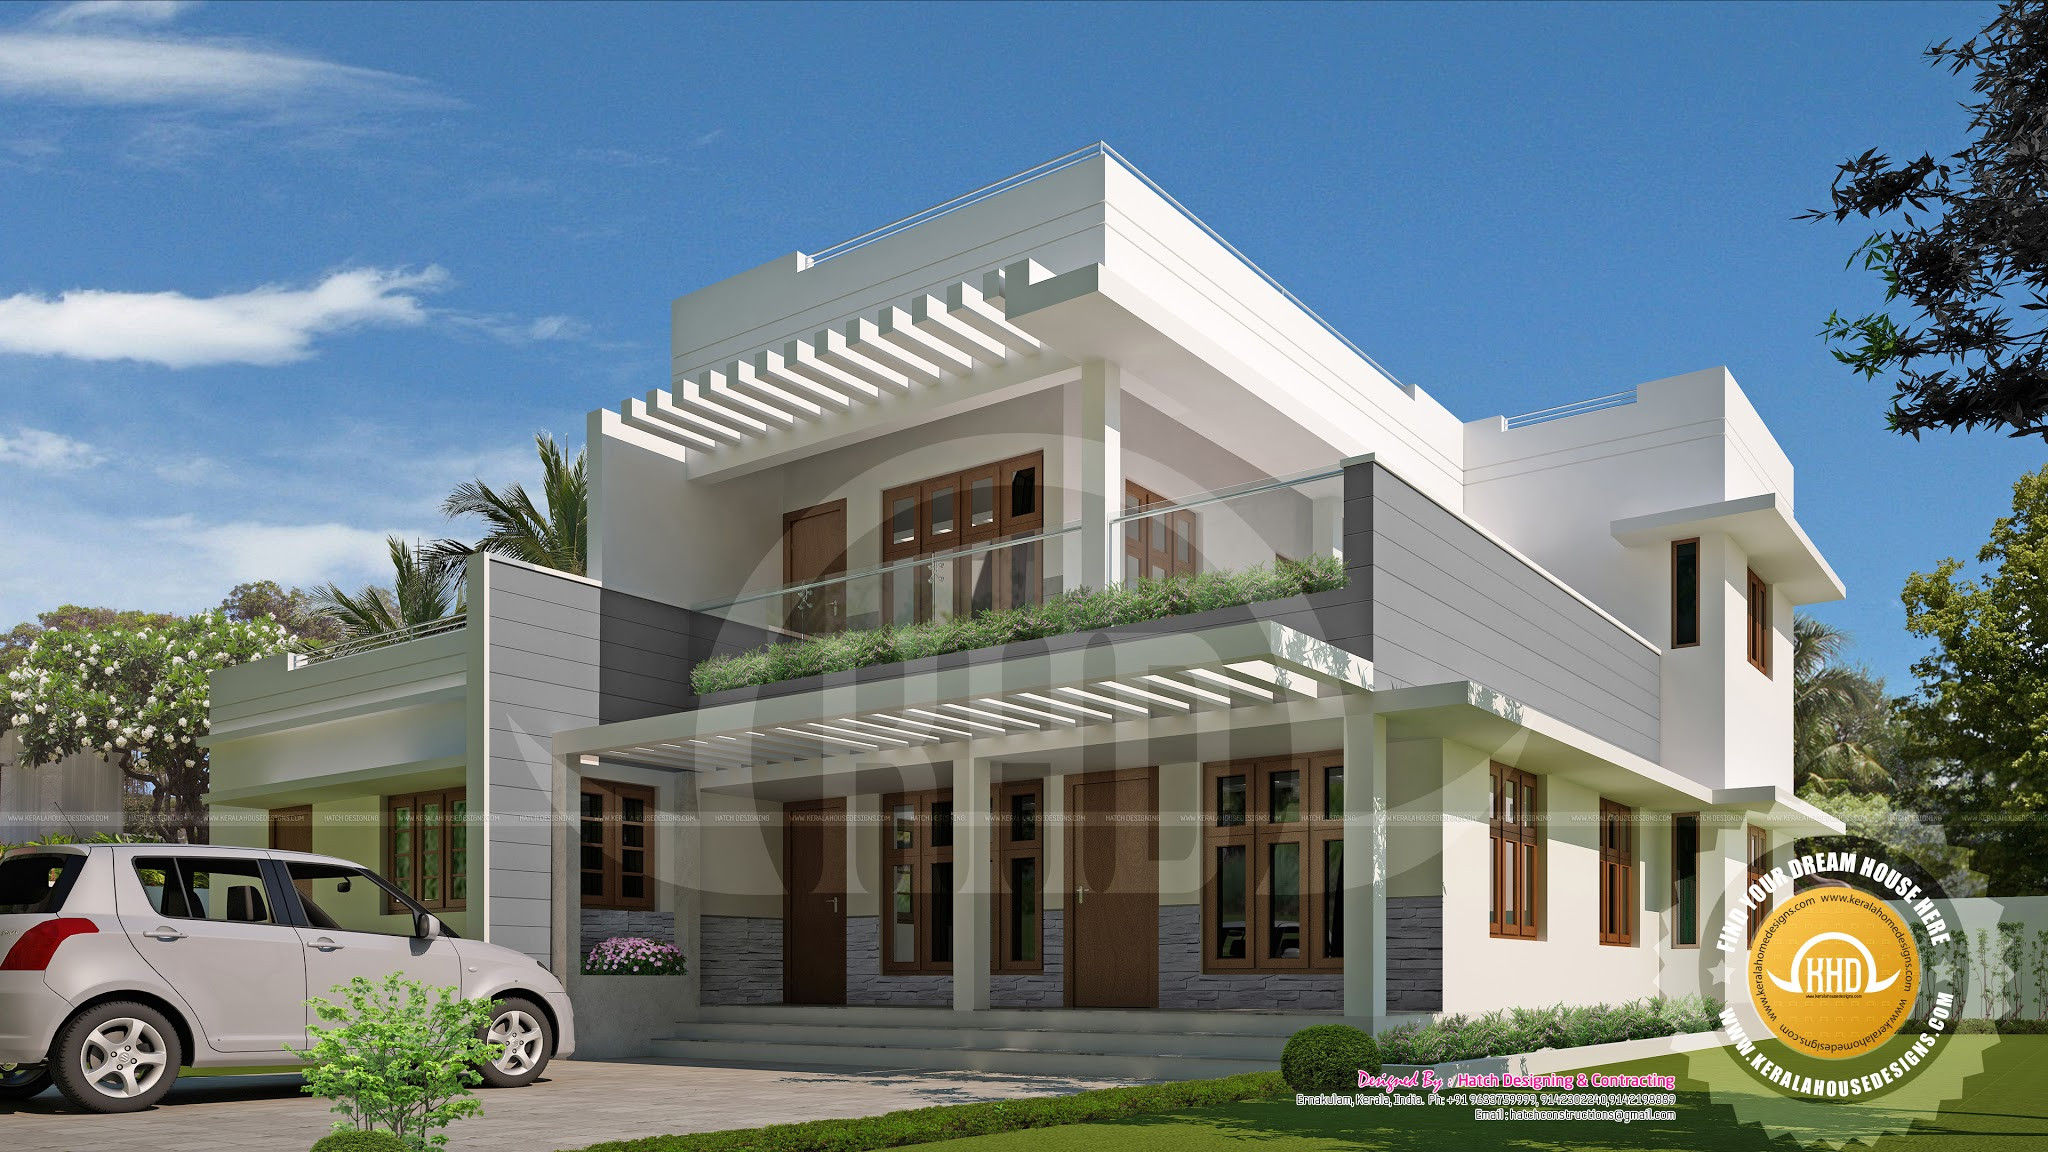 5 Bedroom Modern House Plans
 Contemporary mix 5 bedroom house Kerala home design and